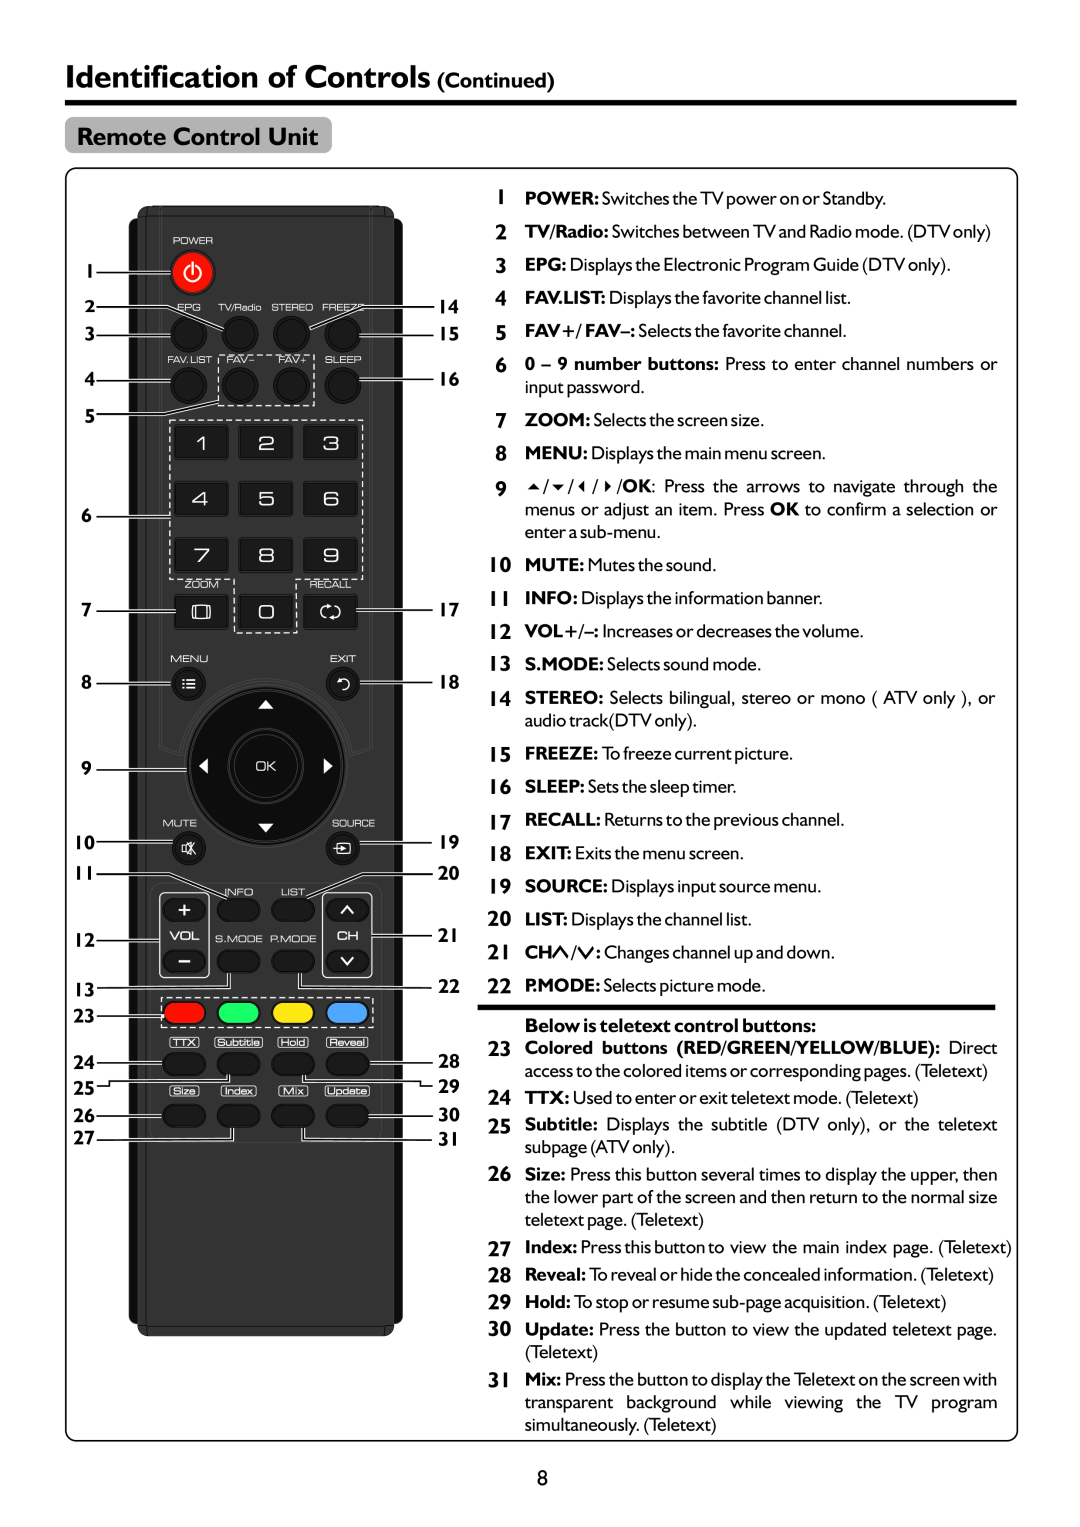 Palsonic TFTV4200FHD Remote Control Unit, Identification of Controls Continued, Below is teletext control buttons 